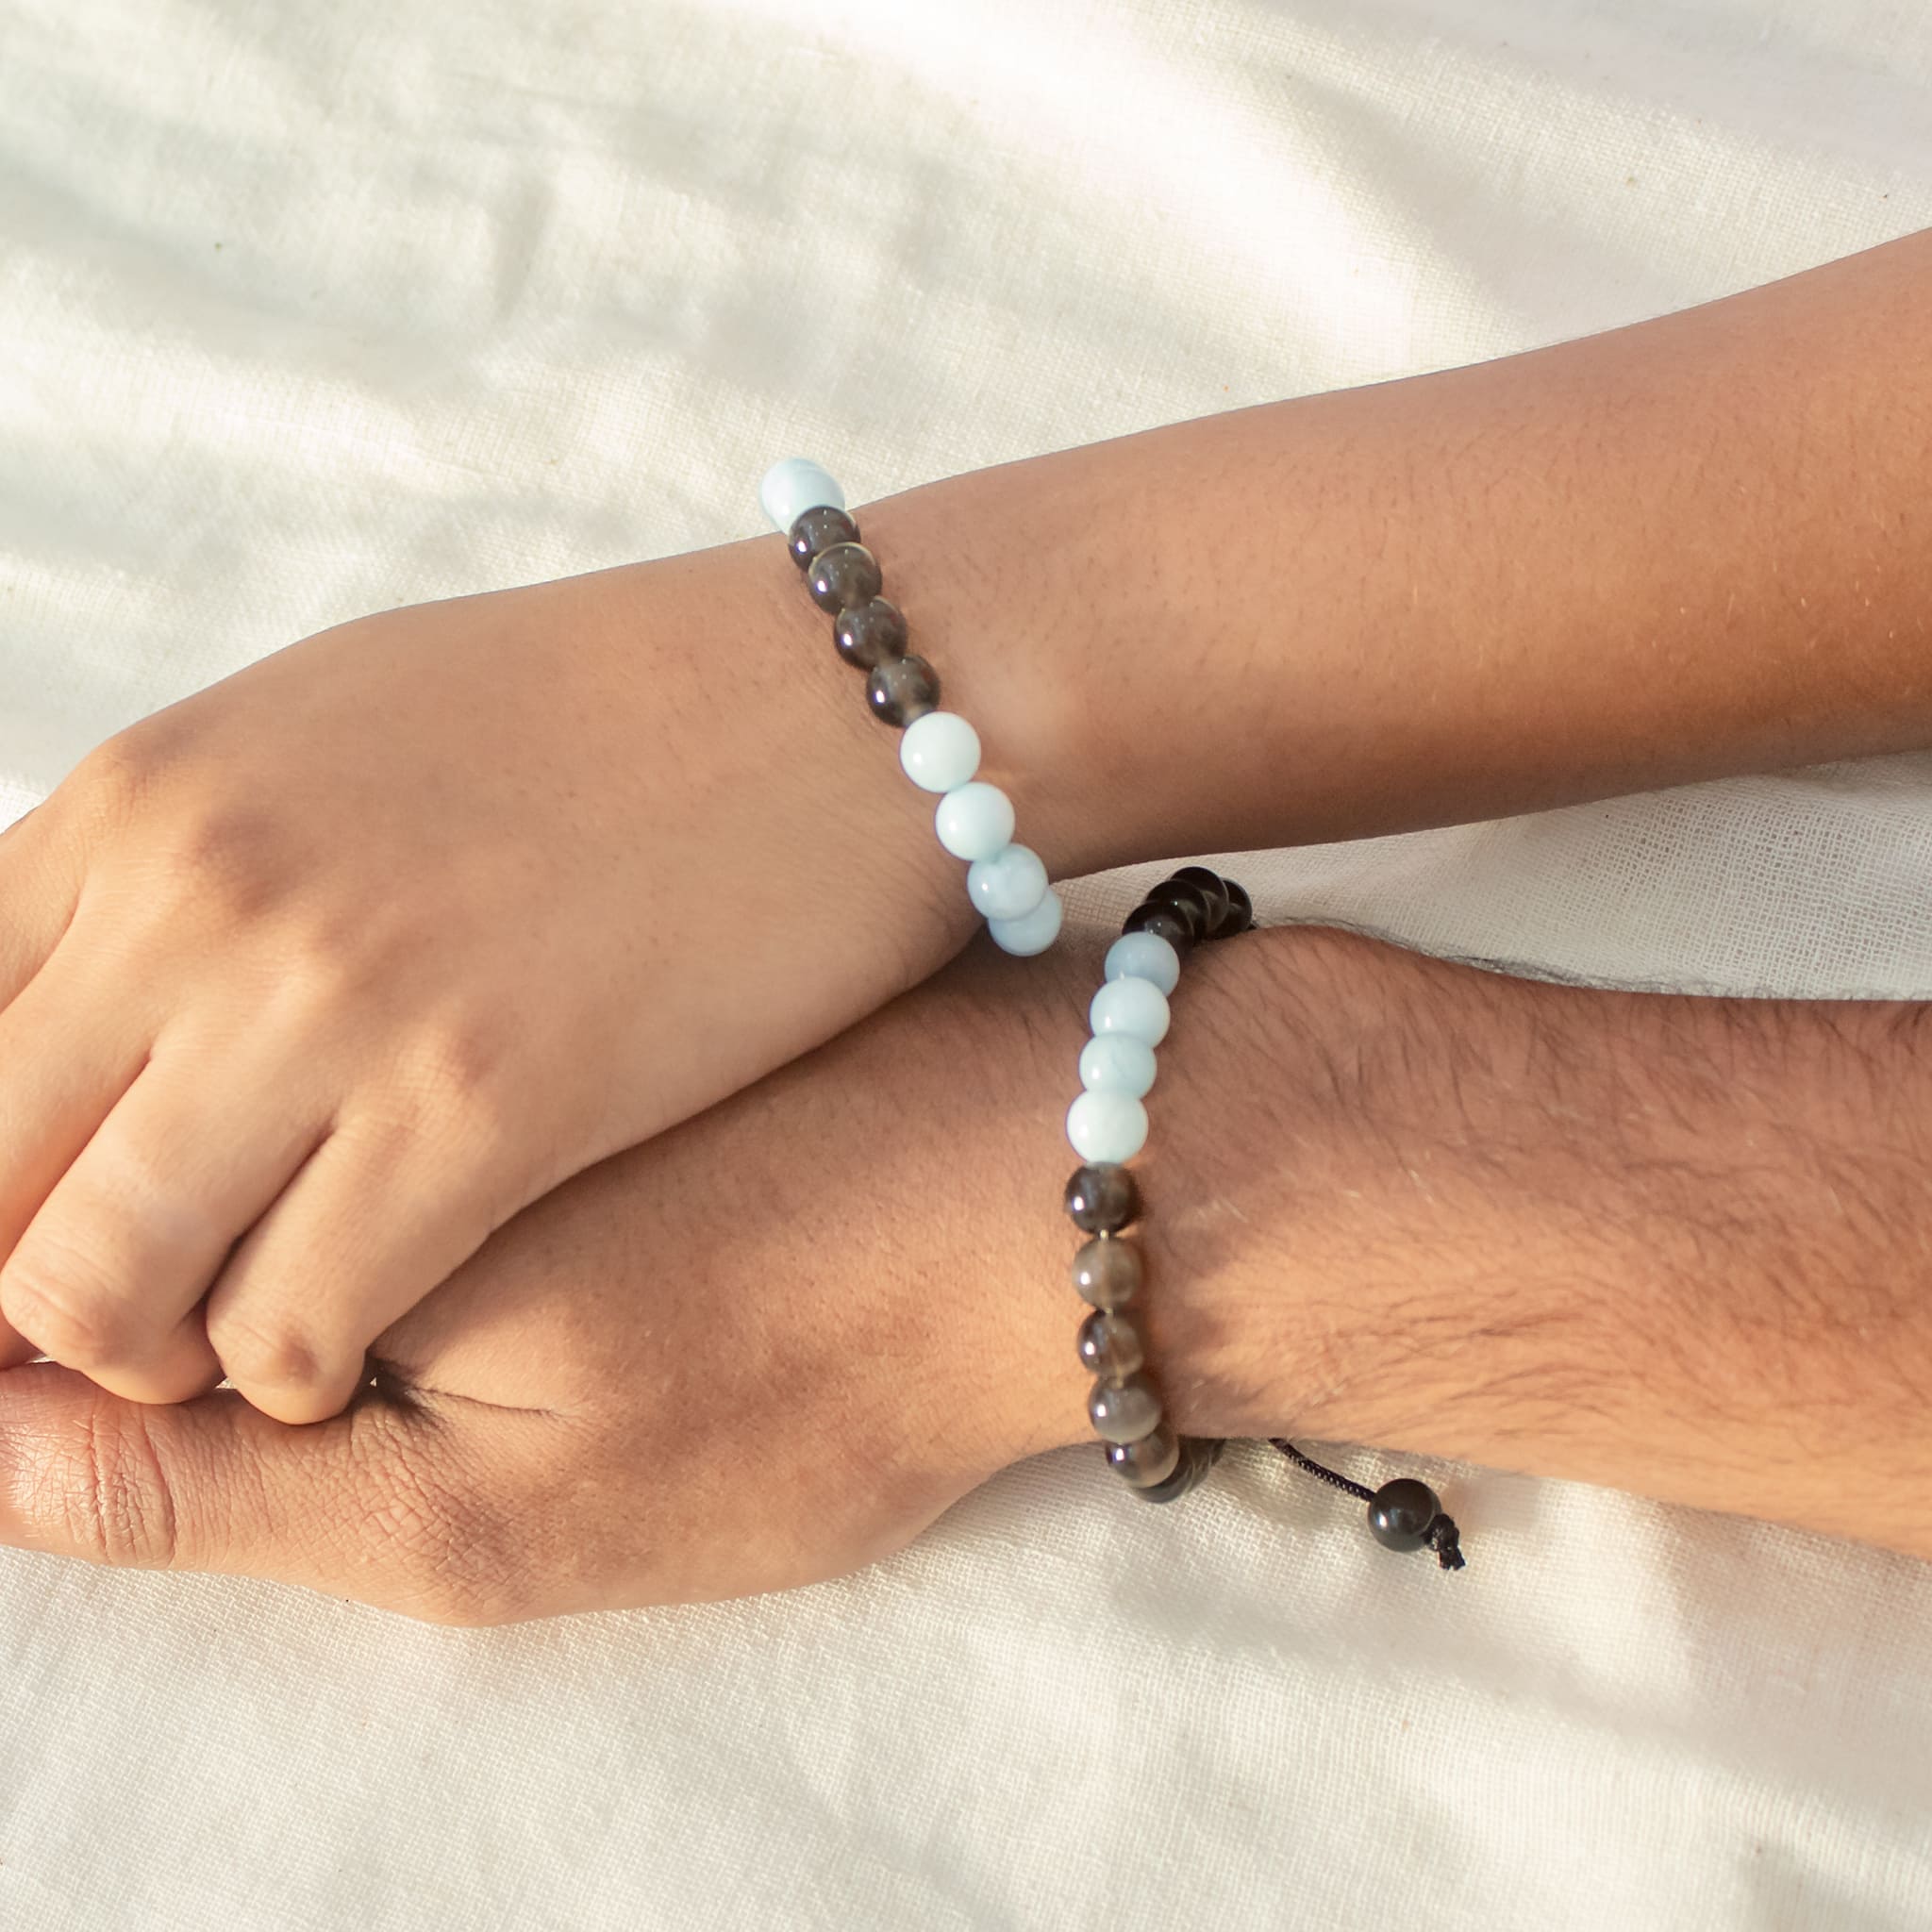 Buy the Cute Couple Magnetic Bracelets for Girls Online at Magnetic Couples  Bracelets : u/magnetic-couples